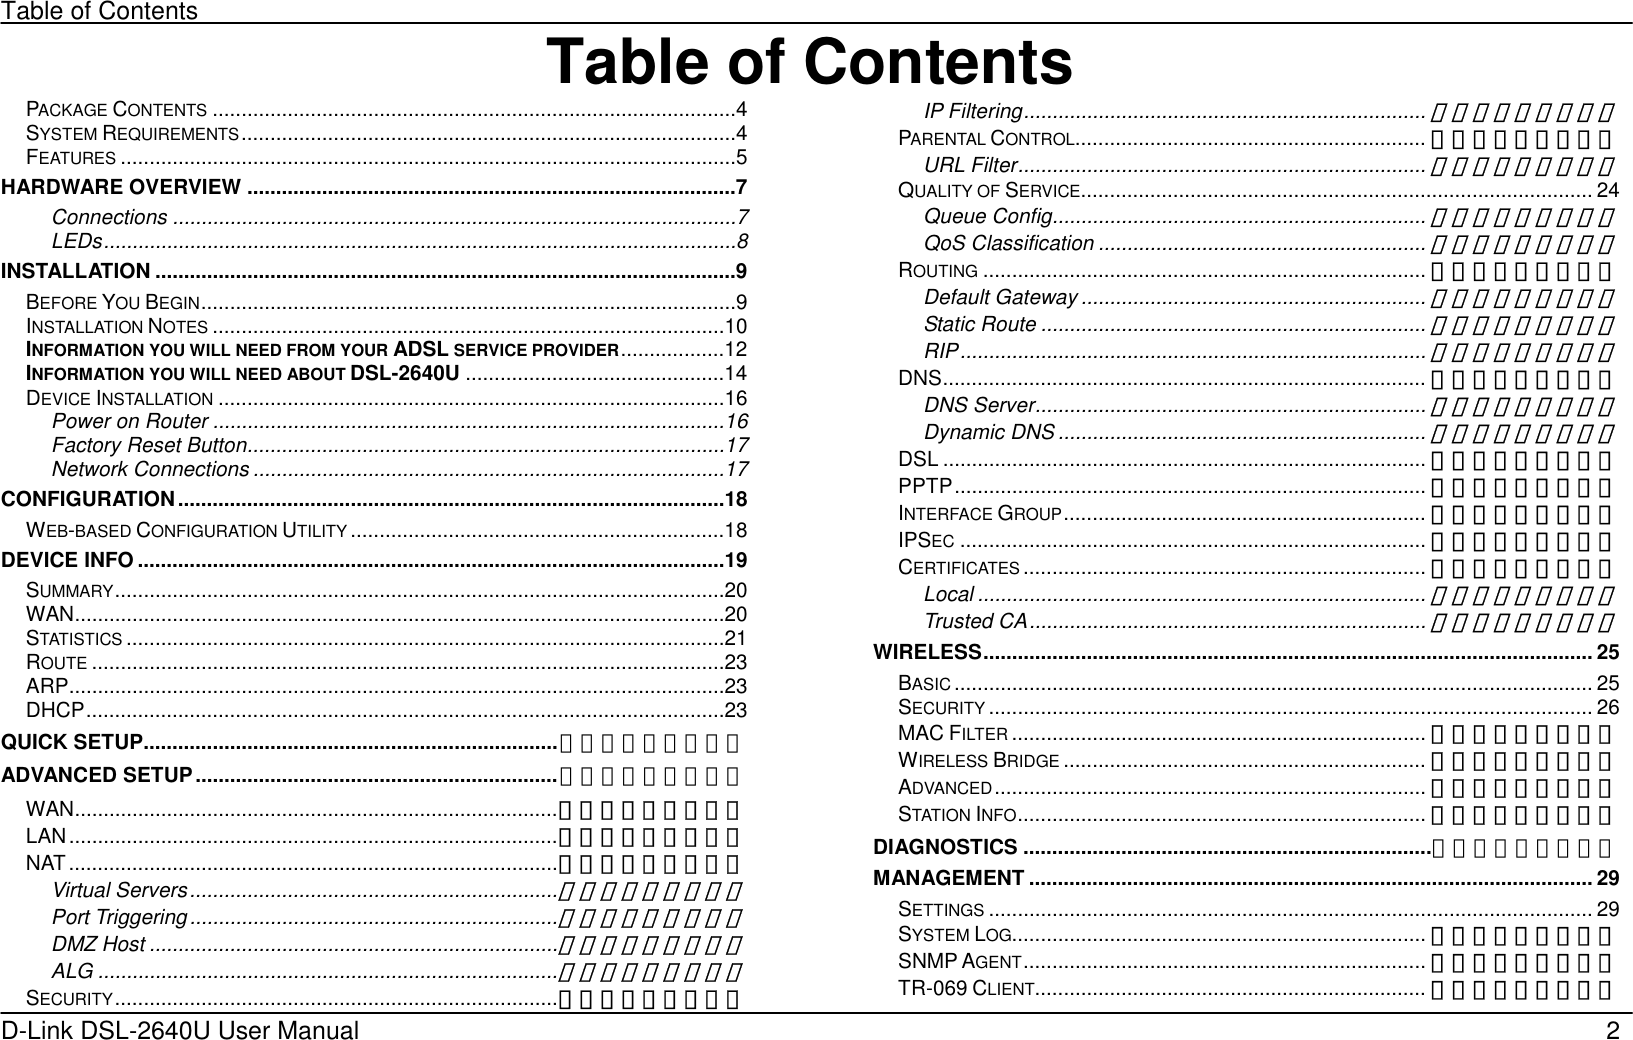 Table of Contents D-Link DSL-2640U User Manual    2Table of ContentsPACKAGE CONTENTS ...........................................................................................4 SYSTEM REQUIREMENTS......................................................................................4 FEATURES ...........................................................................................................5 HARDWARE OVERVIEW .....................................................................................7 Connections ..................................................................................................7 LEDs..............................................................................................................8 INSTALLATION .....................................................................................................9 BEFORE YOU BEGIN.............................................................................................9 INSTALLATION NOTES .........................................................................................10 INFORMATION YOU WILL NEED FROM YOUR ADSL SERVICE PROVIDER..................12 INFORMATION YOU WILL NEED ABOUT DSL-2640U .............................................14 DEVICE INSTALLATION ........................................................................................16 Power on Router .........................................................................................16 Factory Reset Button...................................................................................17 Network Connections ..................................................................................17 CONFIGURATION...............................................................................................18 WEB-BASED CONFIGURATION UTILITY .................................................................18 DEVICE INFO ......................................................................................................19 SUMMARY..........................................................................................................20 WAN.................................................................................................................20 STATISTICS ........................................................................................................21 ROUTE ..............................................................................................................23 ARP..................................................................................................................23 DHCP...............................................................................................................23 QUICK SETUP........................................................................错误！未定义书签。 ADVANCED SETUP...............................................................错误！未定义书签。 WAN....................................................................................错误！未定义书签。 LAN.....................................................................................错误！未定义书签。 NAT.....................................................................................错误！未定义书签。 Virtual Servers................................................................错误！未定义书签。 Port Triggering ................................................................错误！未定义书签。 DMZ Host .......................................................................错误！未定义书签。 ALG ................................................................................错误！未定义书签。 SECURITY.............................................................................错误！未定义书签。 IP Filtering......................................................................错误！未定义书签。 PARENTAL CONTROL............................................................. 错误！未定义书签。 URL Filter.......................................................................错误！未定义书签。 QUALITY OF SERVICE......................................................................................... 24 Queue Config.................................................................错误！未定义书签。 QoS Classification .........................................................错误！未定义书签。 ROUTING ............................................................................. 错误！未定义书签。 Default Gateway ............................................................错误！未定义书签。 Static Route ...................................................................错误！未定义书签。 RIP.................................................................................错误！未定义书签。 DNS.................................................................................... 错误！未定义书签。 DNS Server....................................................................错误！未定义书签。 Dynamic DNS ................................................................错误！未定义书签。 DSL .................................................................................... 错误！未定义书签。 PPTP.................................................................................. 错误！未定义书签。 INTERFACE GROUP............................................................... 错误！未定义书签。 IPSEC ................................................................................. 错误！未定义书签。 CERTIFICATES ...................................................................... 错误！未定义书签。 Local ..............................................................................错误！未定义书签。 Trusted CA.....................................................................错误！未定义书签。 WIRELESS.......................................................................................................... 25 BASIC ............................................................................................................... 25 SECURITY ......................................................................................................... 26 MAC FILTER ........................................................................ 错误！未定义书签。 WIRELESS BRIDGE ............................................................... 错误！未定义书签。 ADVANCED........................................................................... 错误！未定义书签。 STATION INFO....................................................................... 错误！未定义书签。 DIAGNOSTICS .......................................................................错误！未定义书签。 MANAGEMENT .................................................................................................. 29 SETTINGS ......................................................................................................... 29 SYSTEM LOG........................................................................ 错误！未定义书签。 SNMP AGENT...................................................................... 错误！未定义书签。 TR-069 CLIENT.................................................................... 错误！未定义书签。 